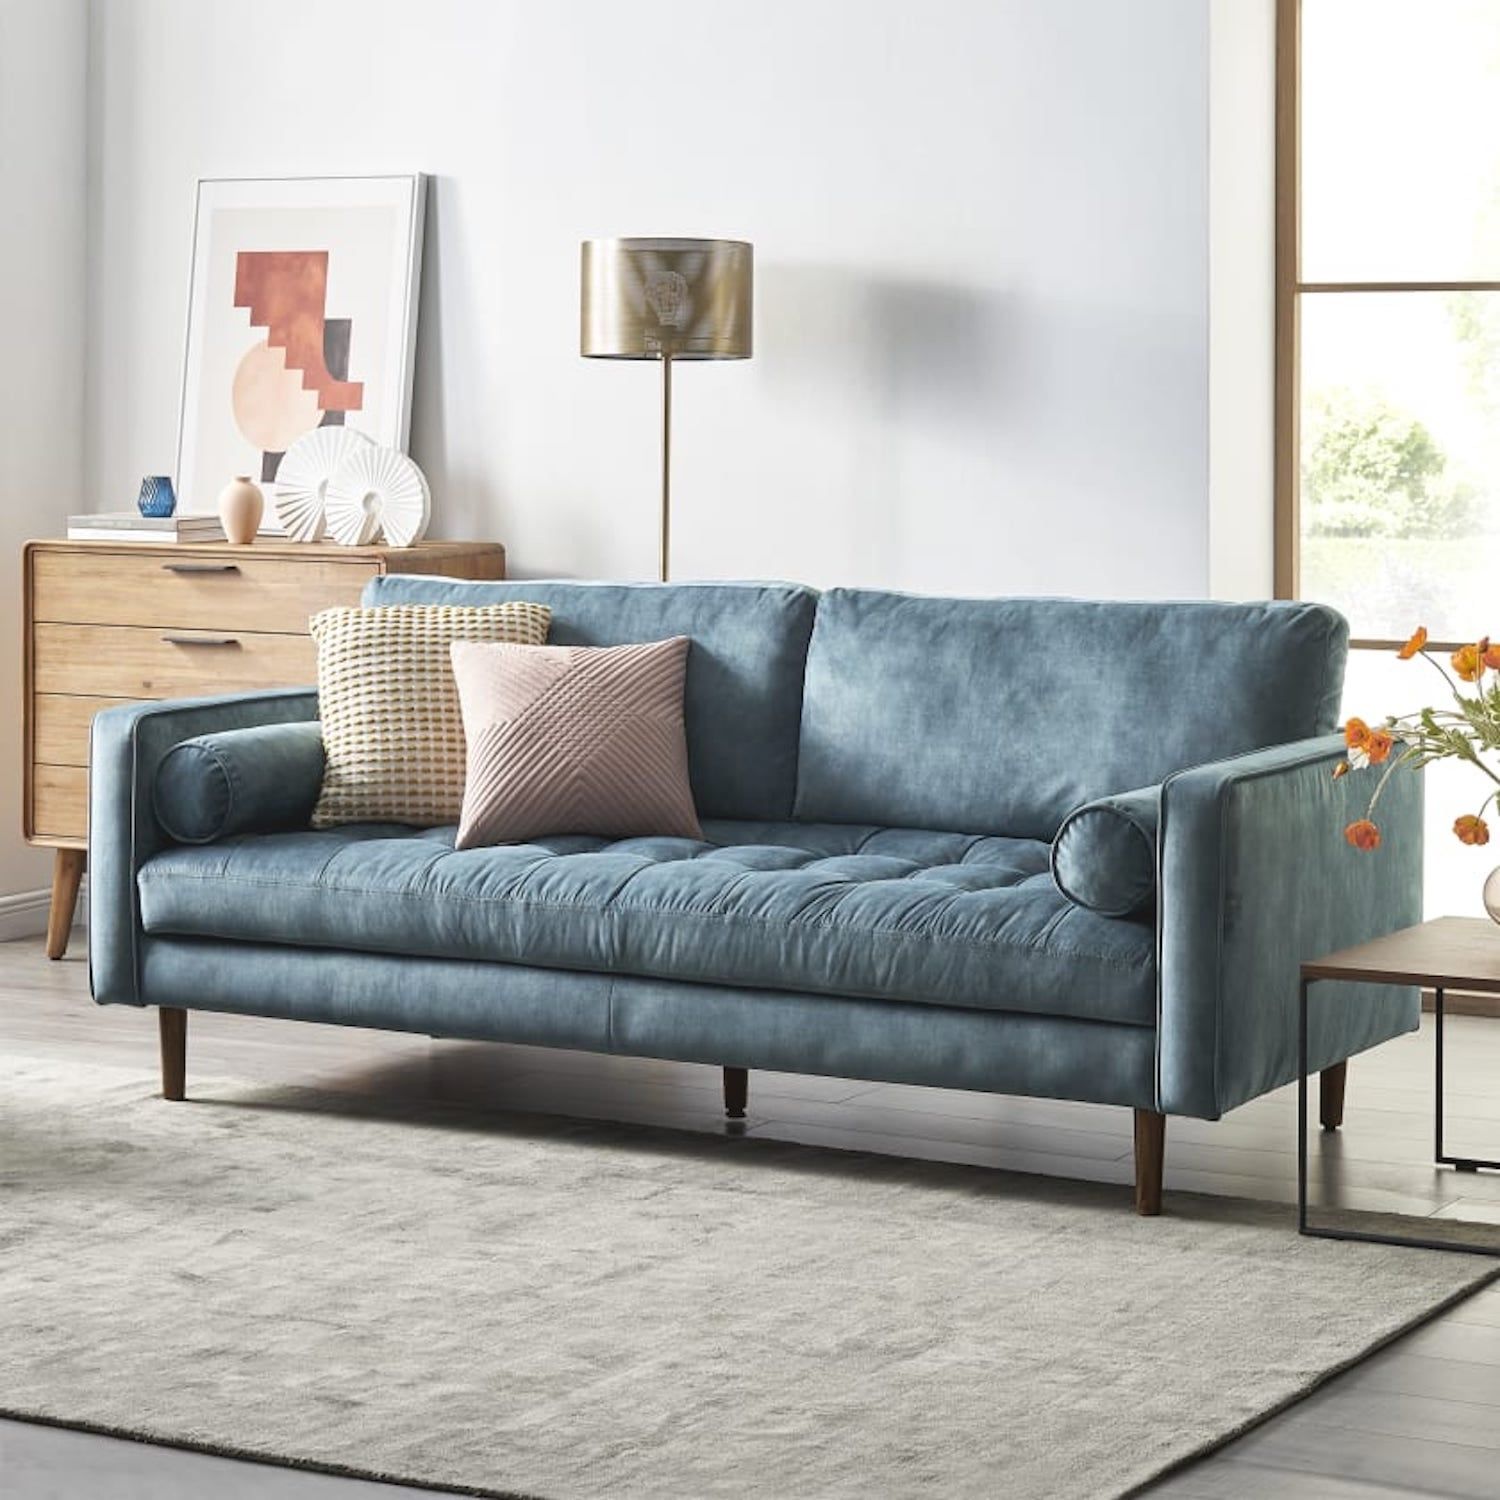 Best And Most Comfortable Mid Century Modern Sofas | Popsugar Home Uk Pertaining To Mid Century Modern Sofas (View 7 of 15)